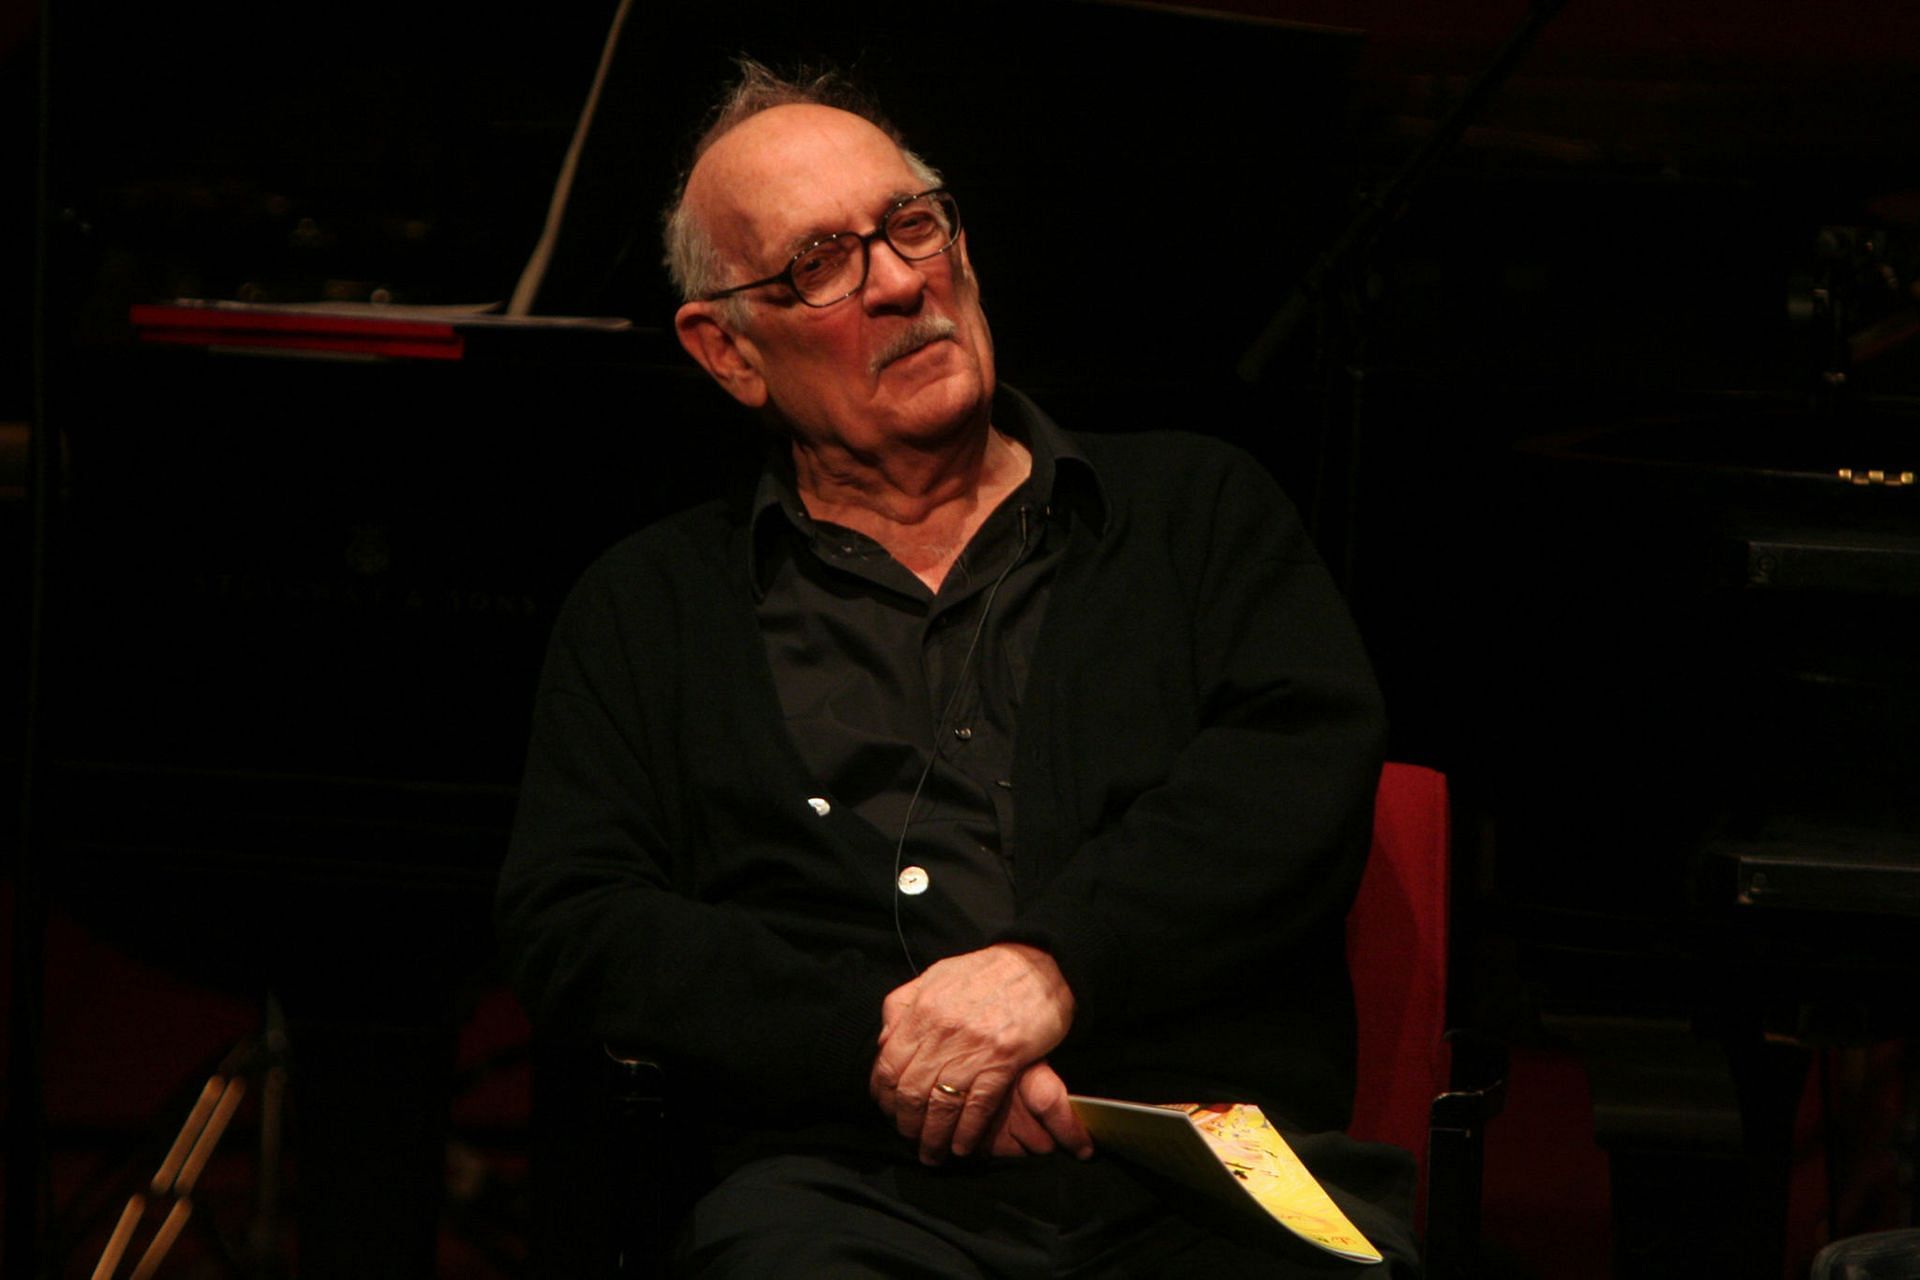 George Crumb recently died at the age of 92 (Image via Getty Images/Hiroyuki Ito)